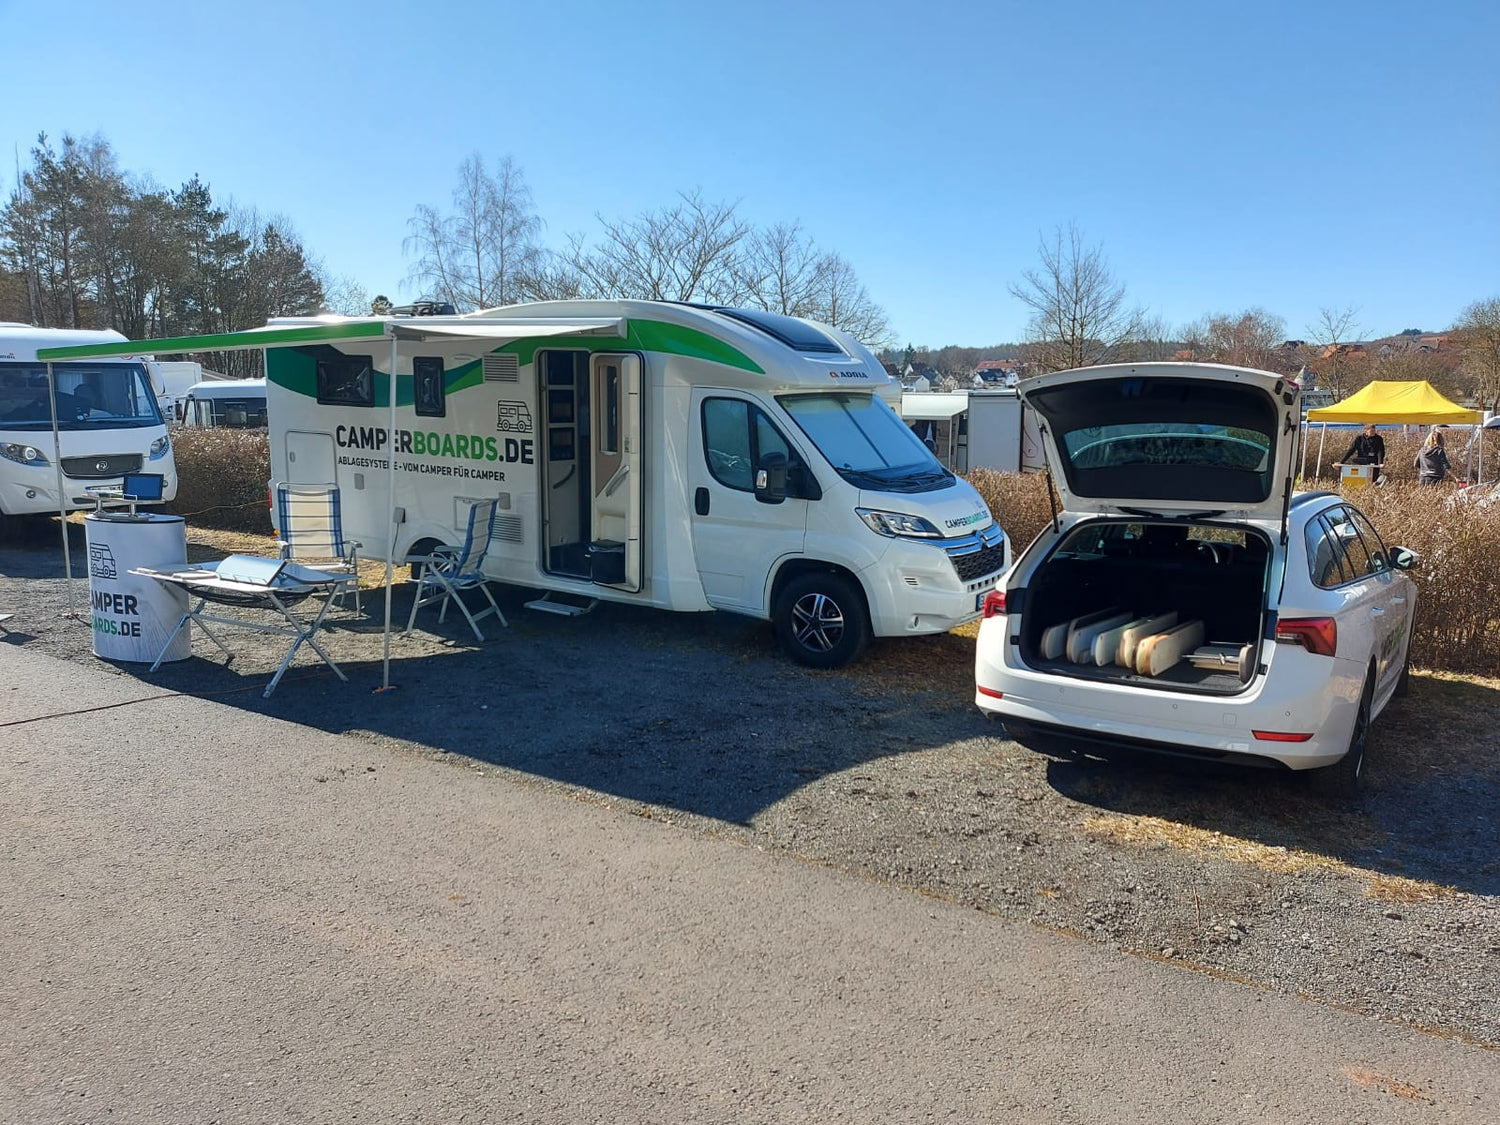 The community meets in Klüsserath: Camperboards is there